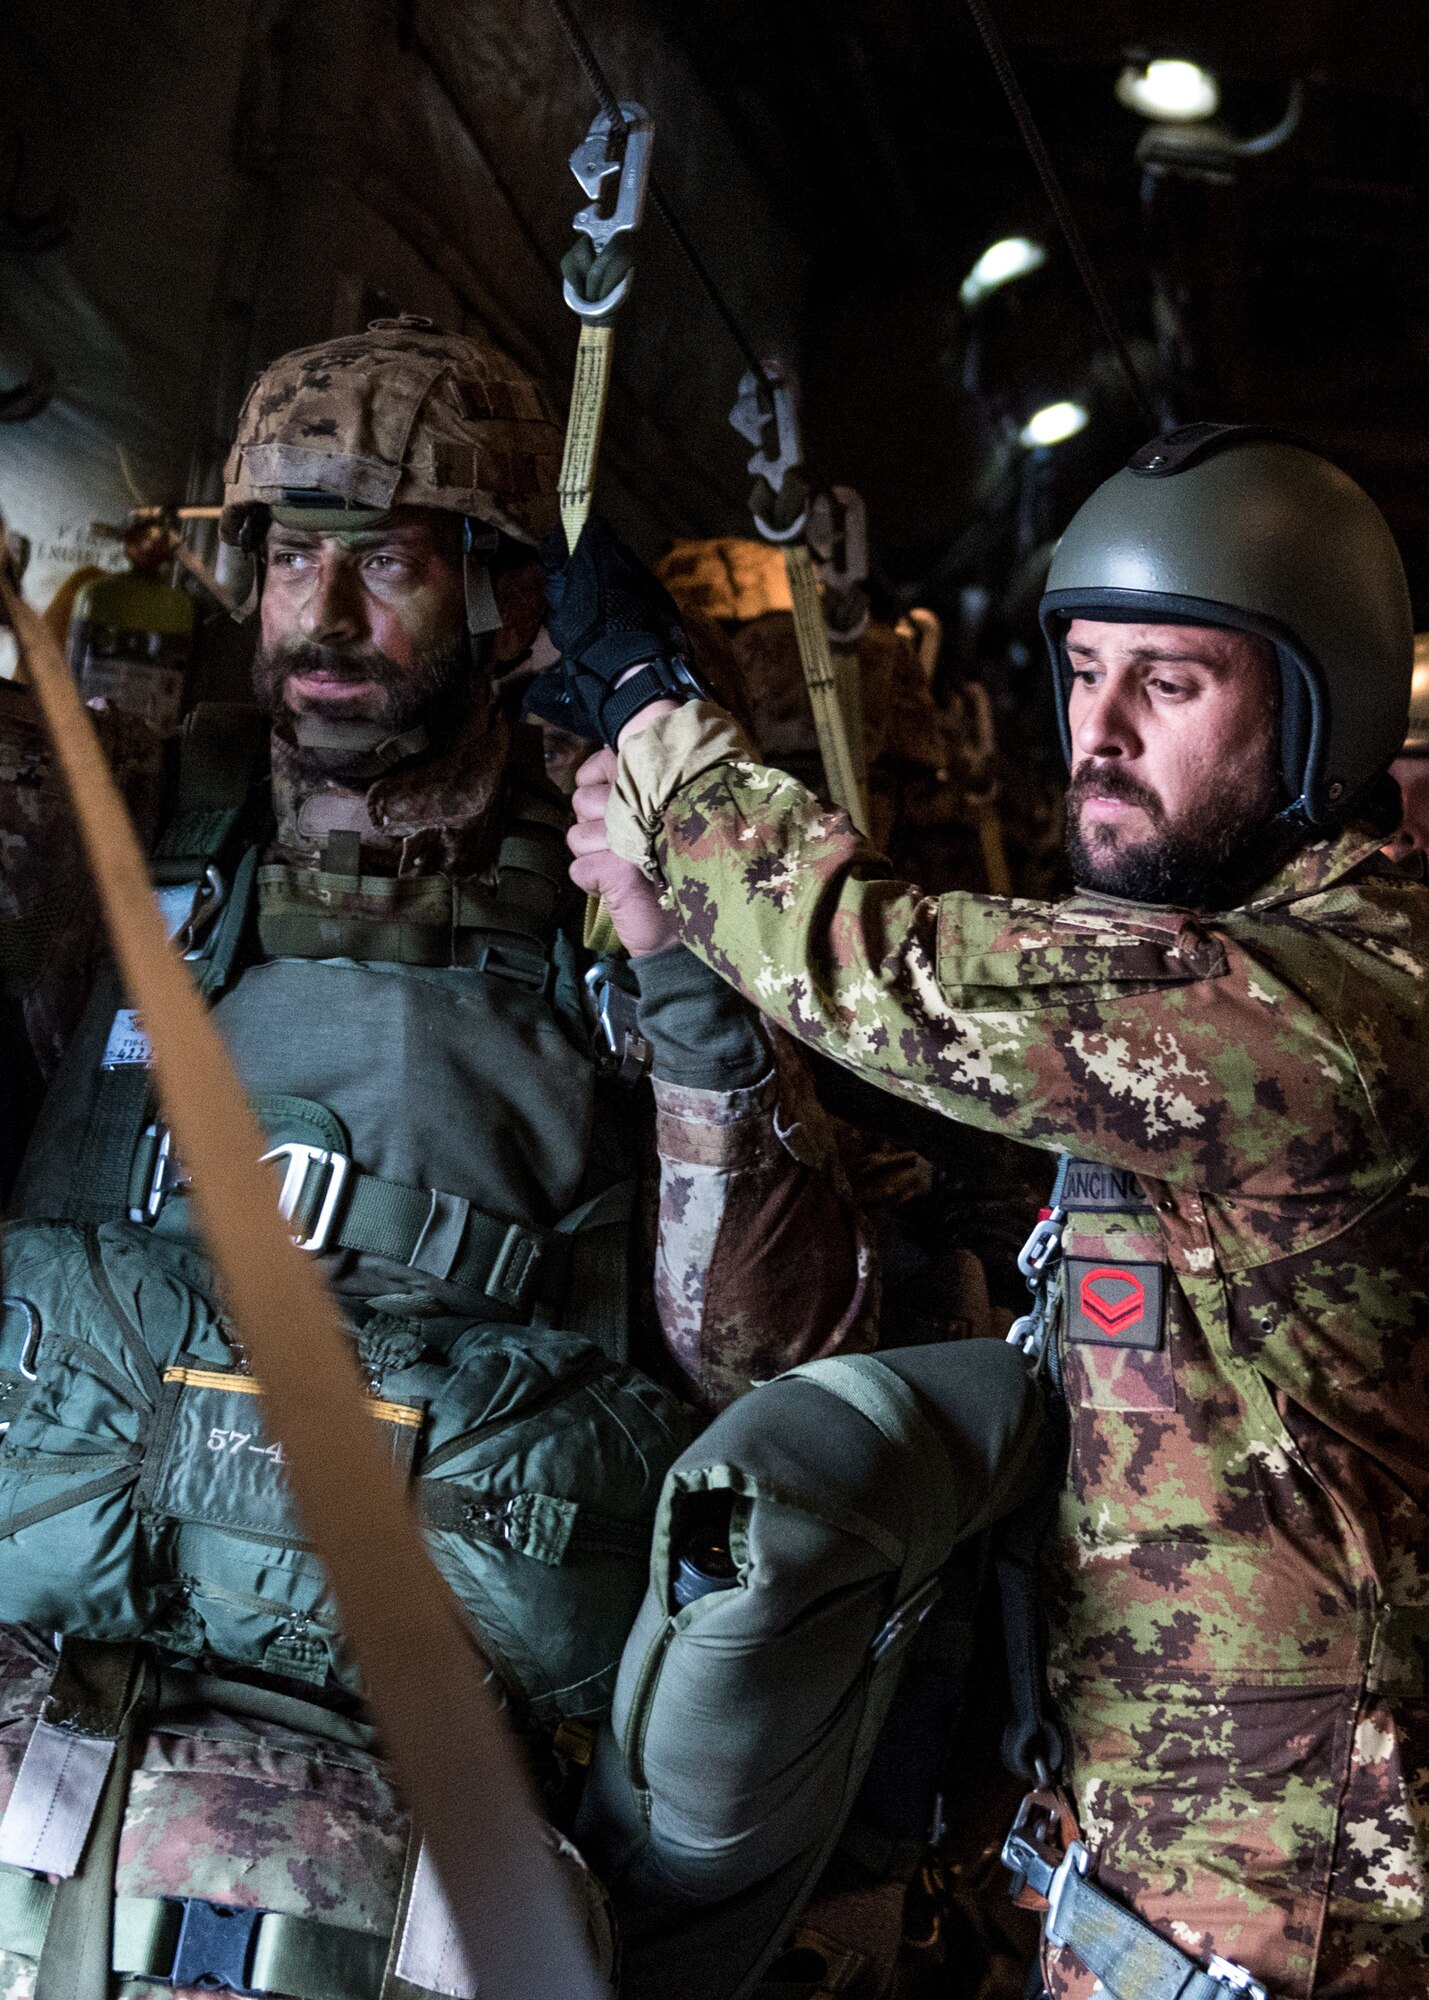 Members of the Italian Folgore, an airborne paratrooper brigade from the Italian Army, execute an airdrop mission alongside members of the Kentucky Air National Guard’s 123rd Airlift Wing in Pisa, Italy, Nov. 7, 2019. The mission was part of Mangusta 19, a bi-lateral exercise designed to promote readiness and interoperability among NATO allies. (U.S. Air National Guard photo by Senior Airman Chloe Ochs)